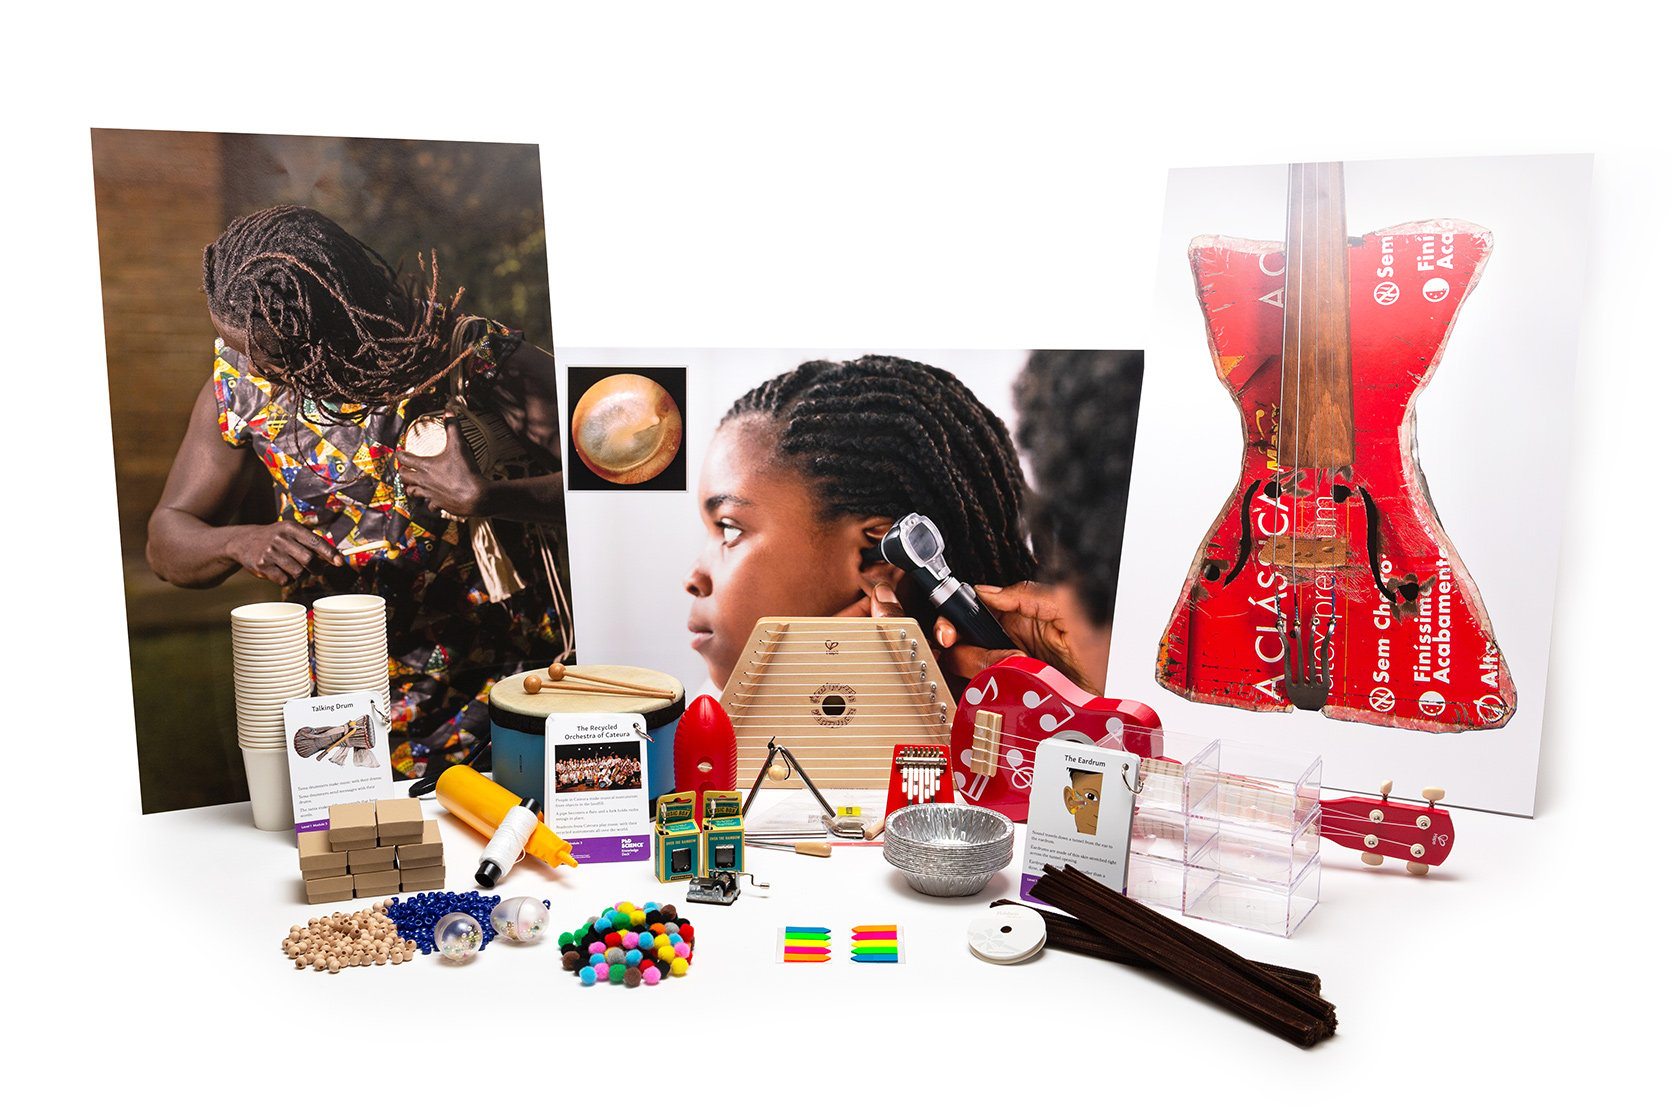 PhD Science hands-on materials kit from Level 1 Module 3 that includes a lap harp, music boxes, Knowledge Deck cards and posters, and pom-poms